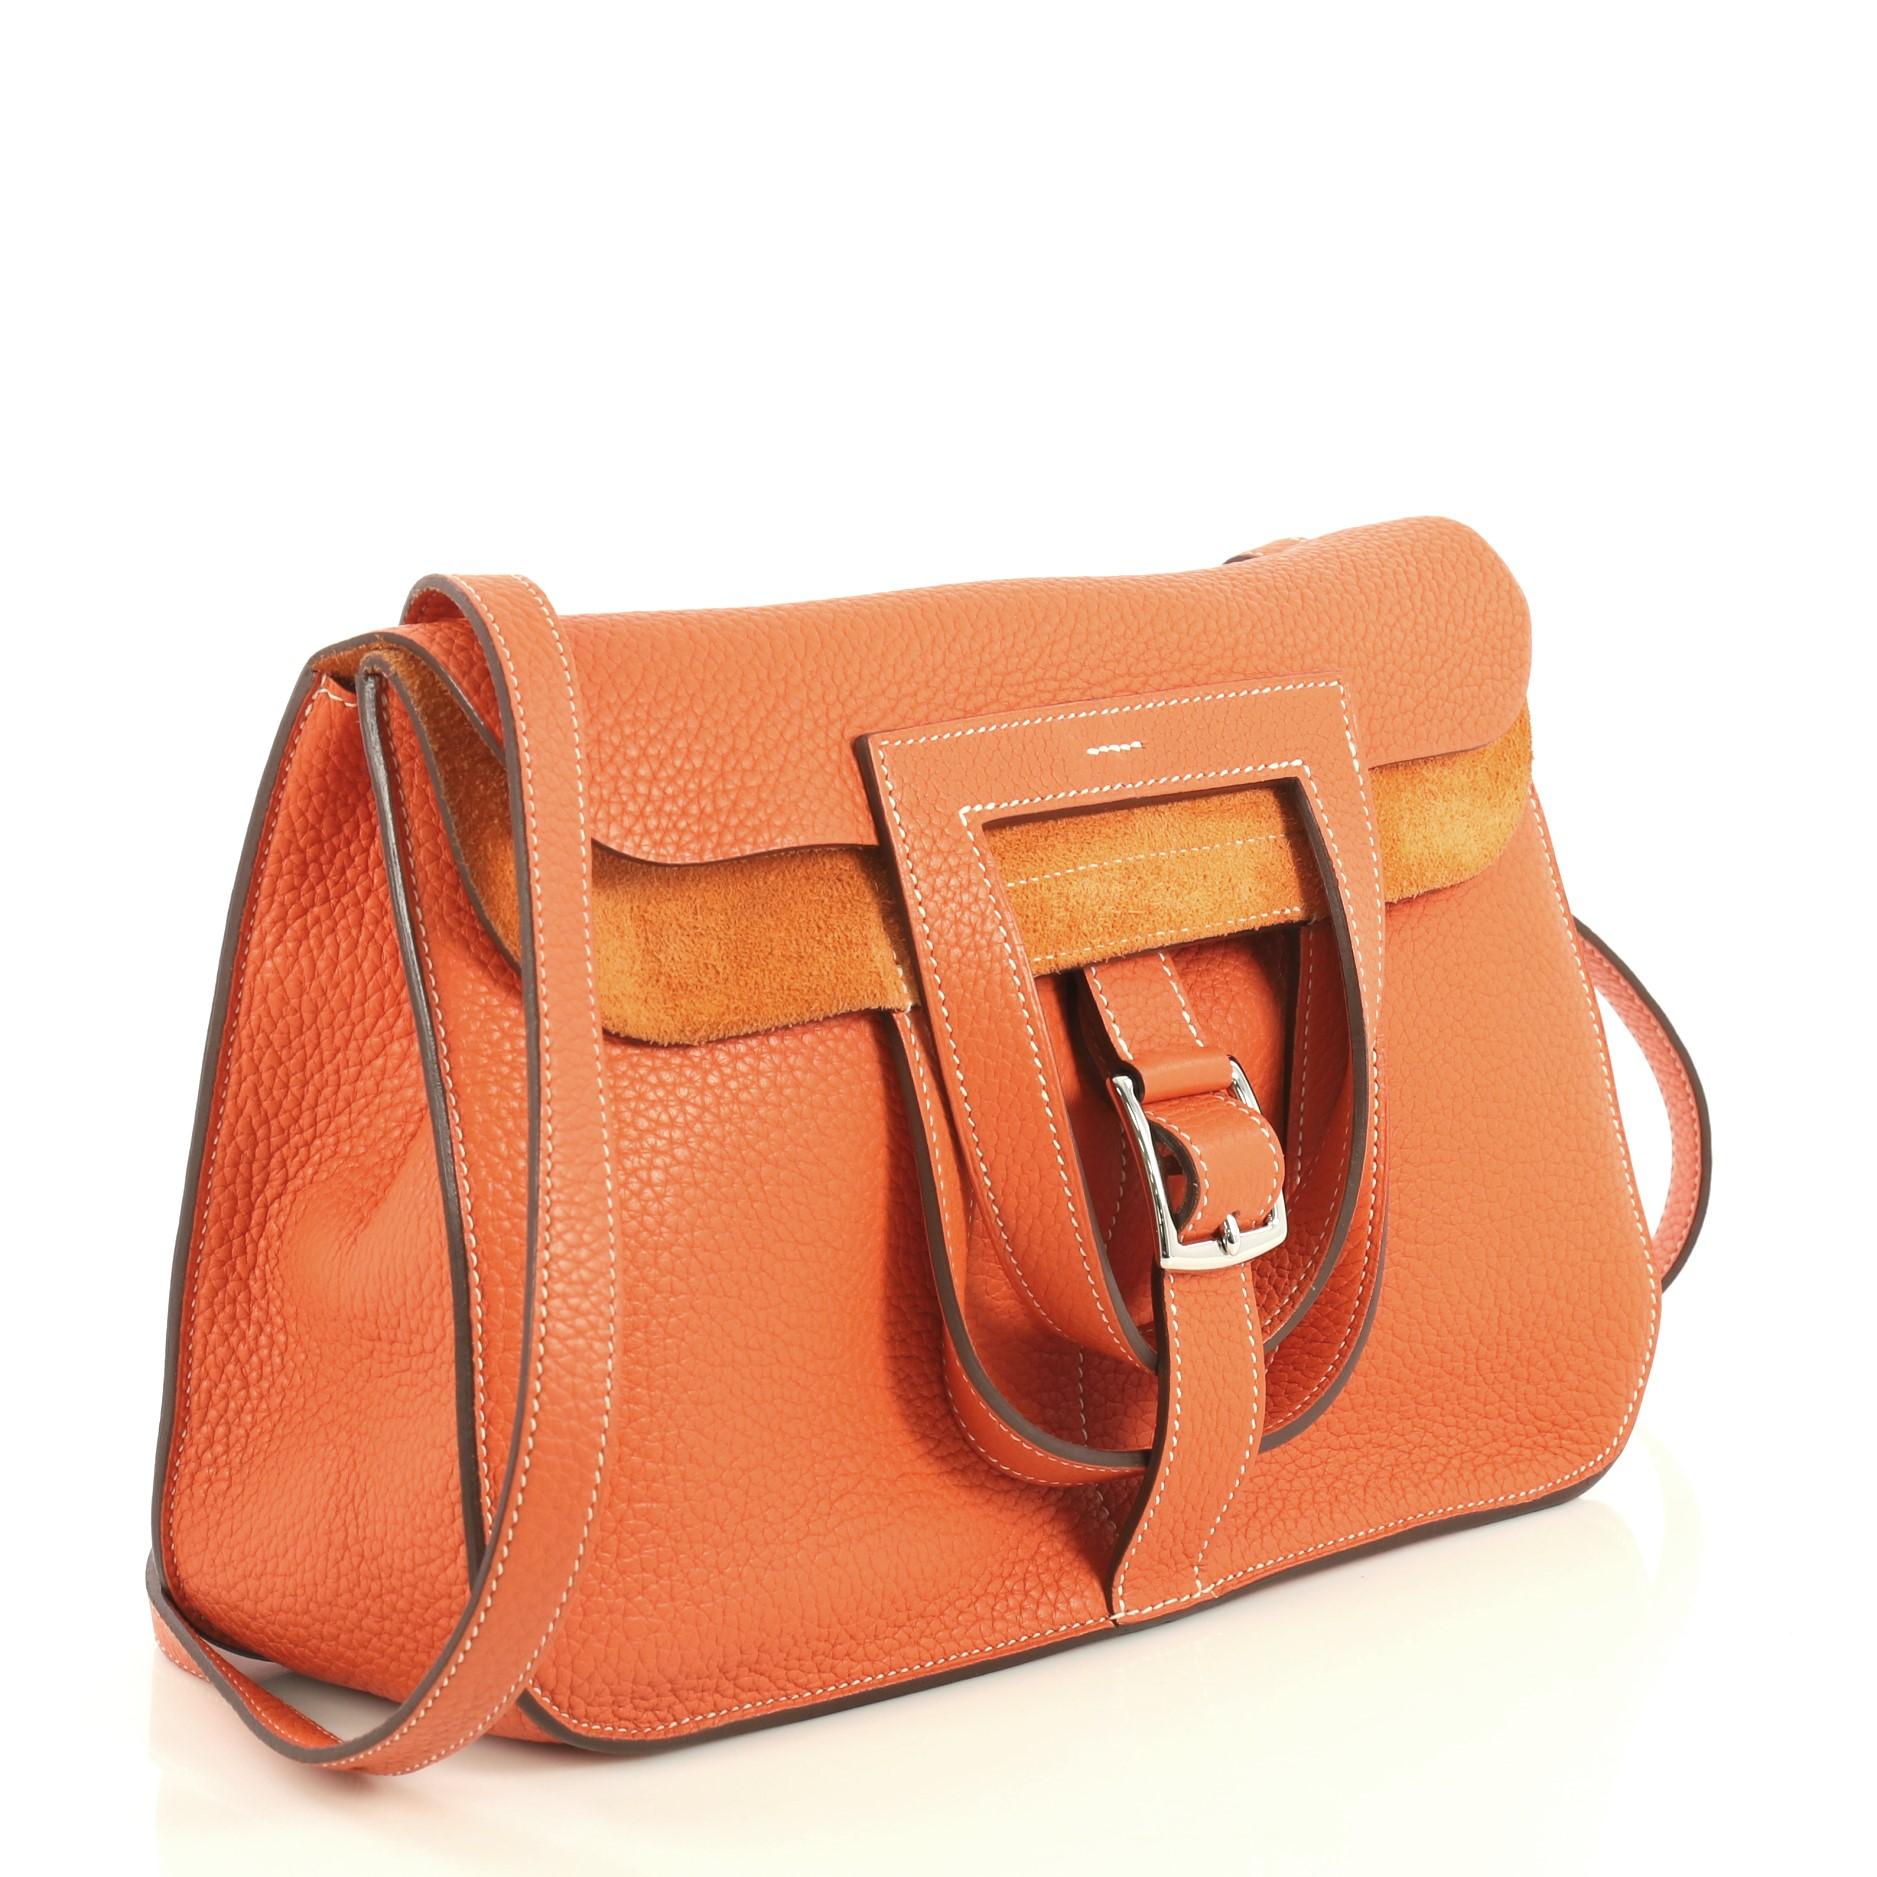 This Hermes Halzan Handbag Clemence 31, crafted from Orange Poppy orange Clemence leather, features dual stirrup-shaped top handles, flat shoulder strap, four exterior flat pockets, and palladium hardware. Its buckle closure opens to an Orange Poppy